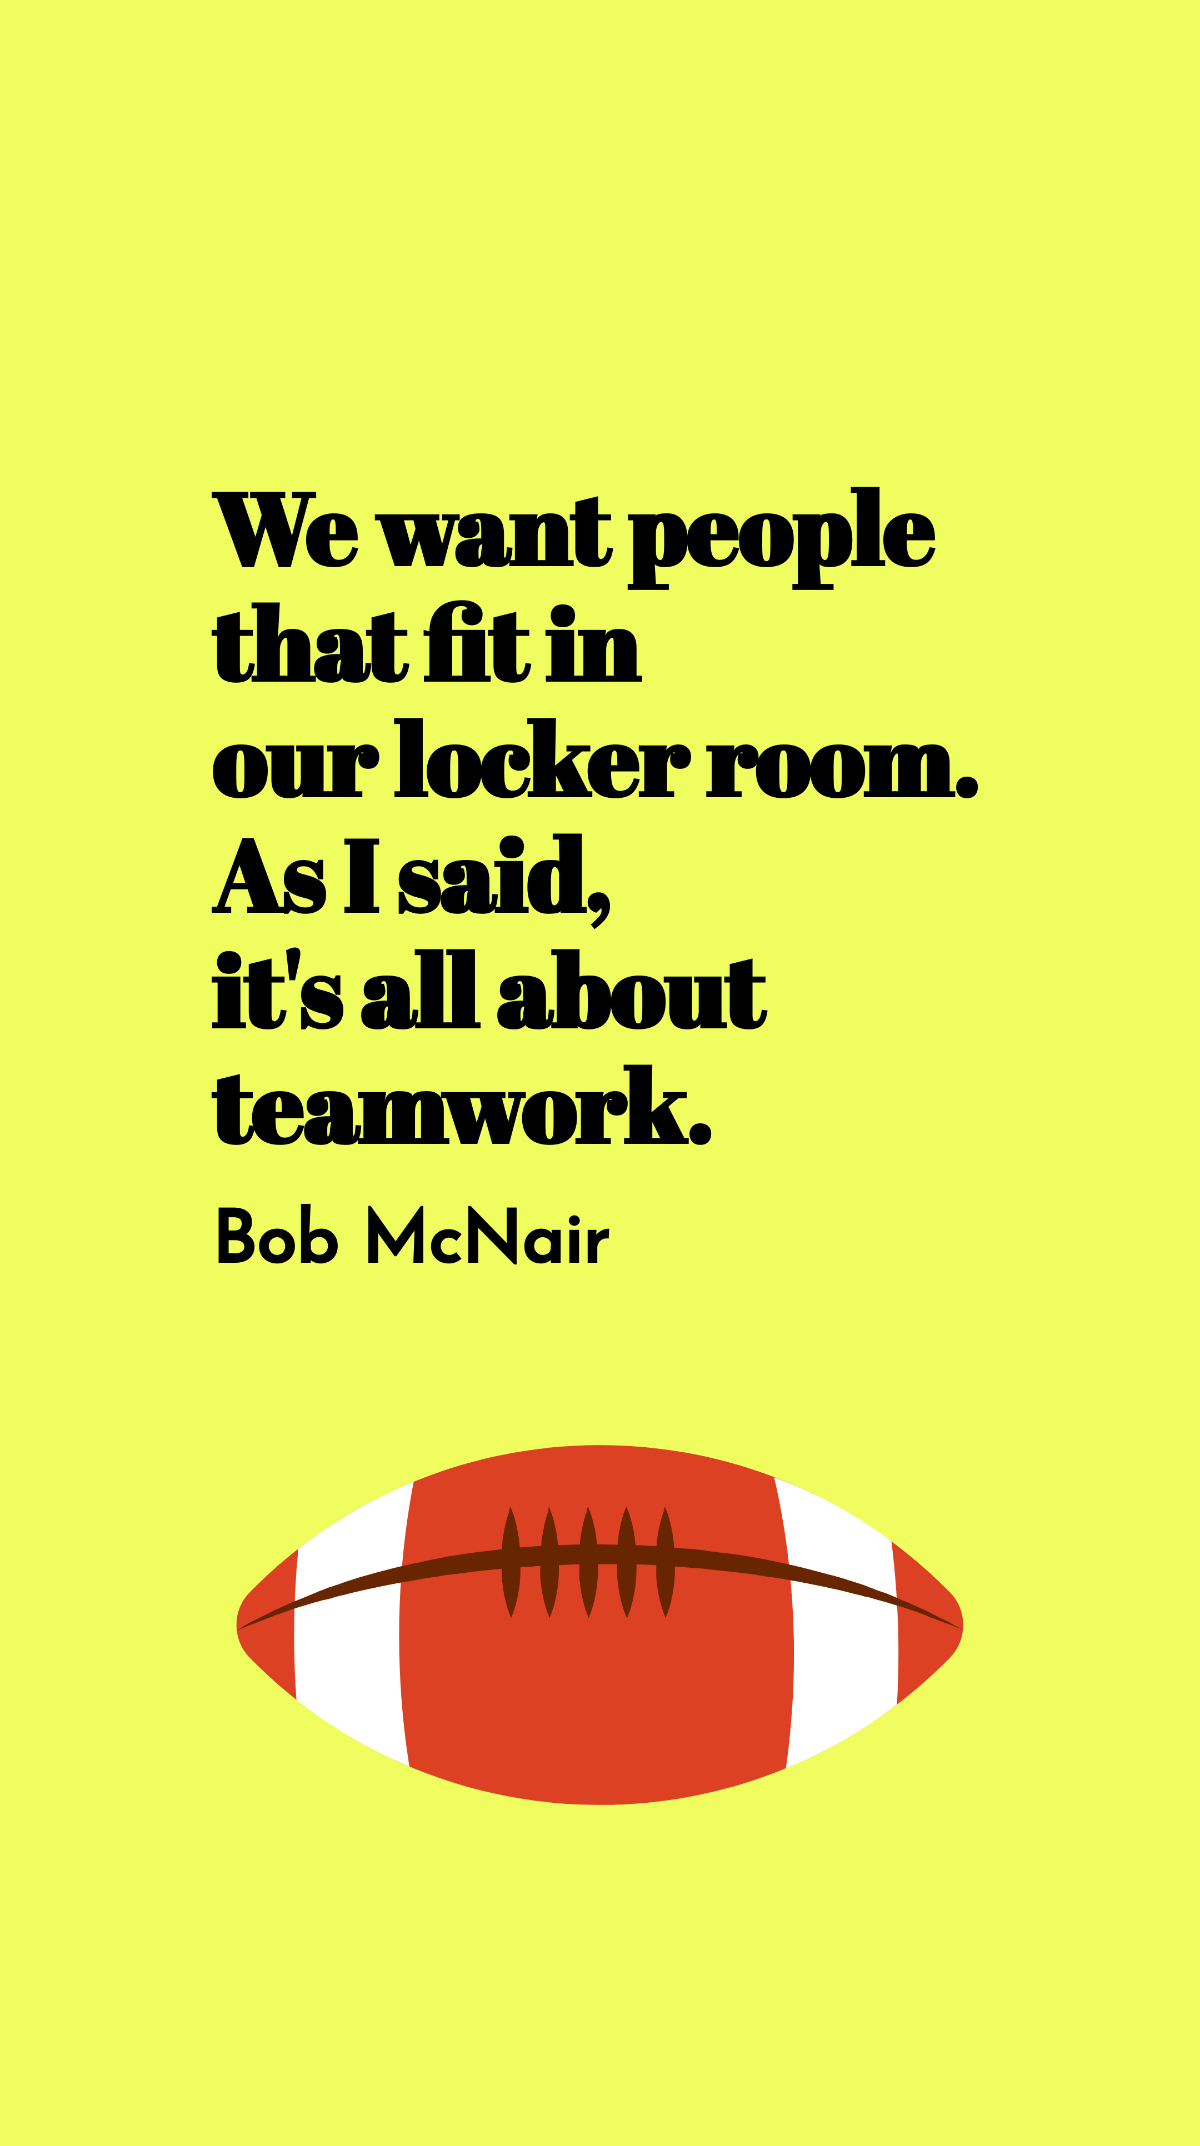 Free Bob McNair - We want people that fit in our locker room. As I said, it's all about teamwork. Template